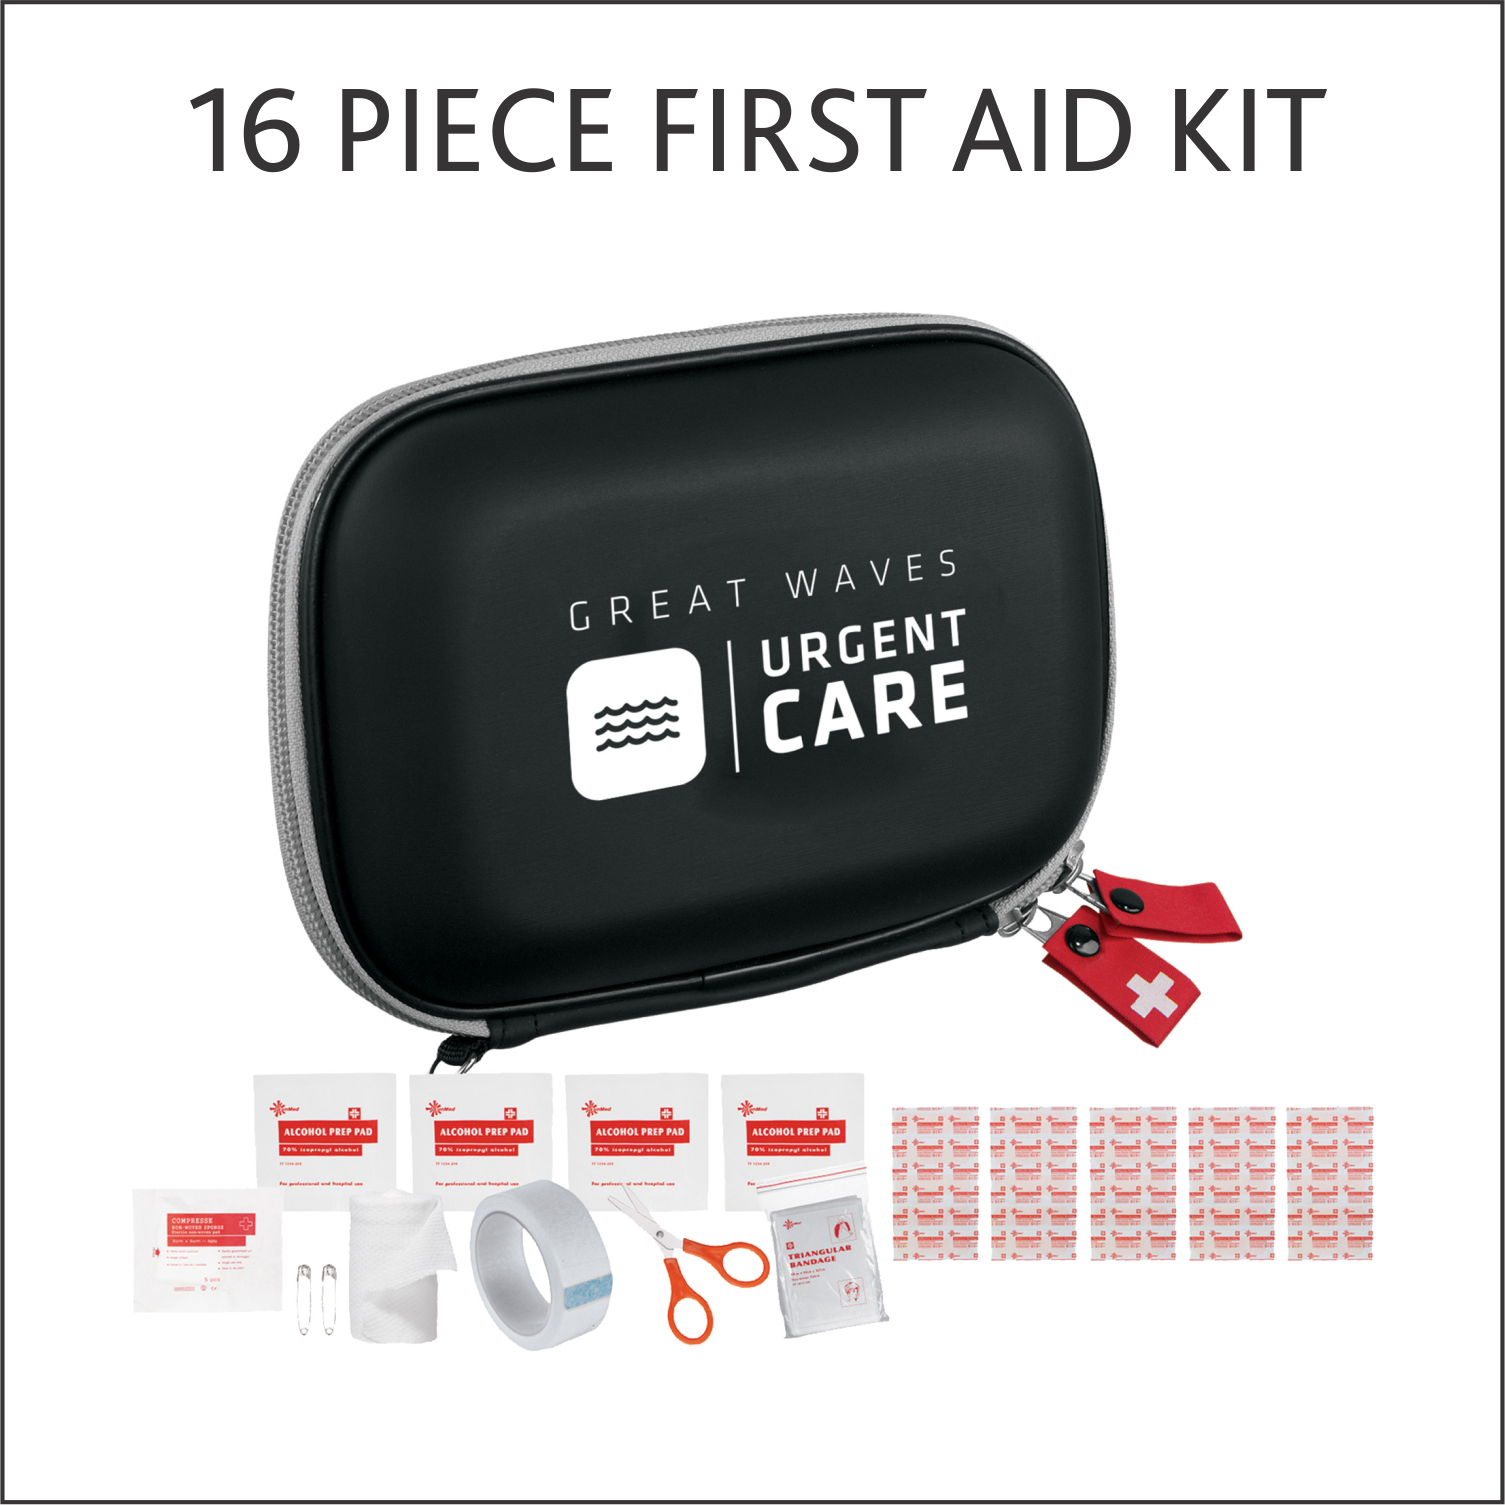 1ST AID KIT.png